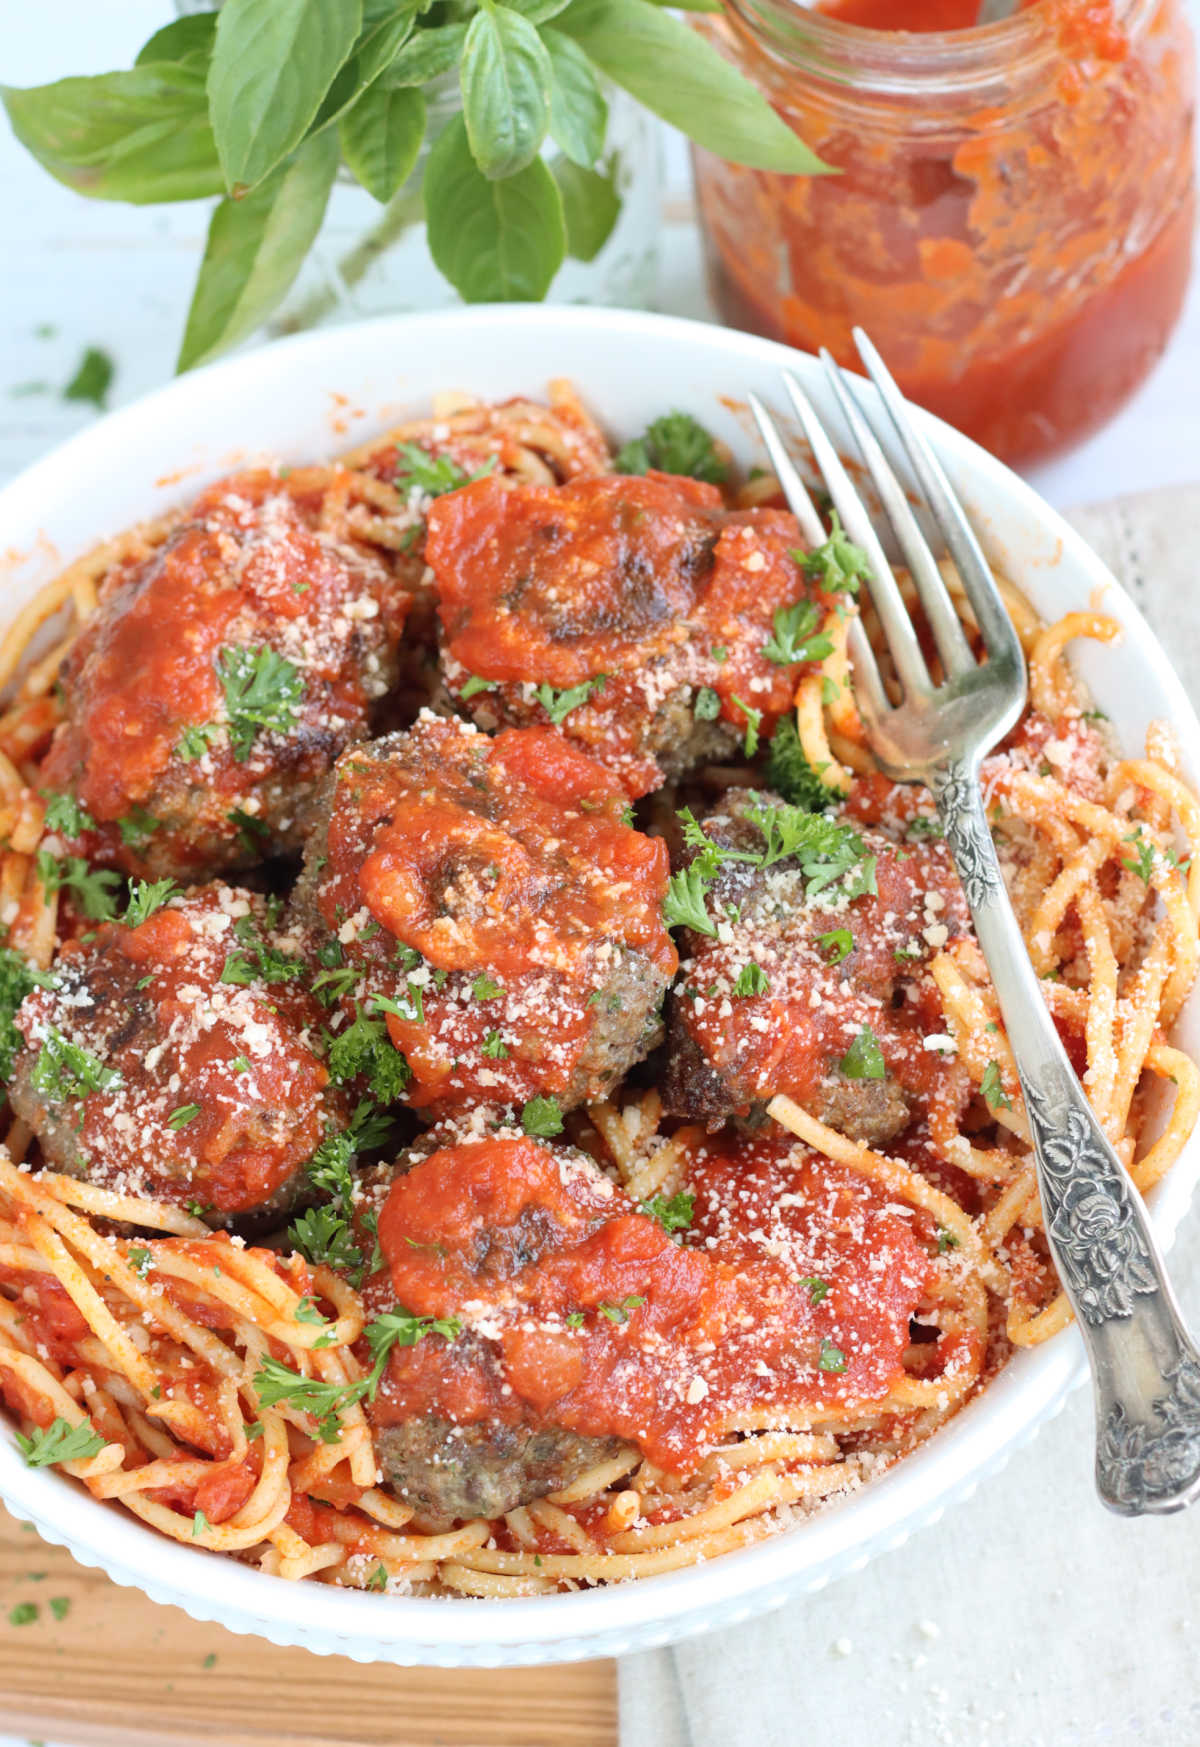 Spaghetti and meatballs in small white bowl with fork, sitting on wooden cutting board.